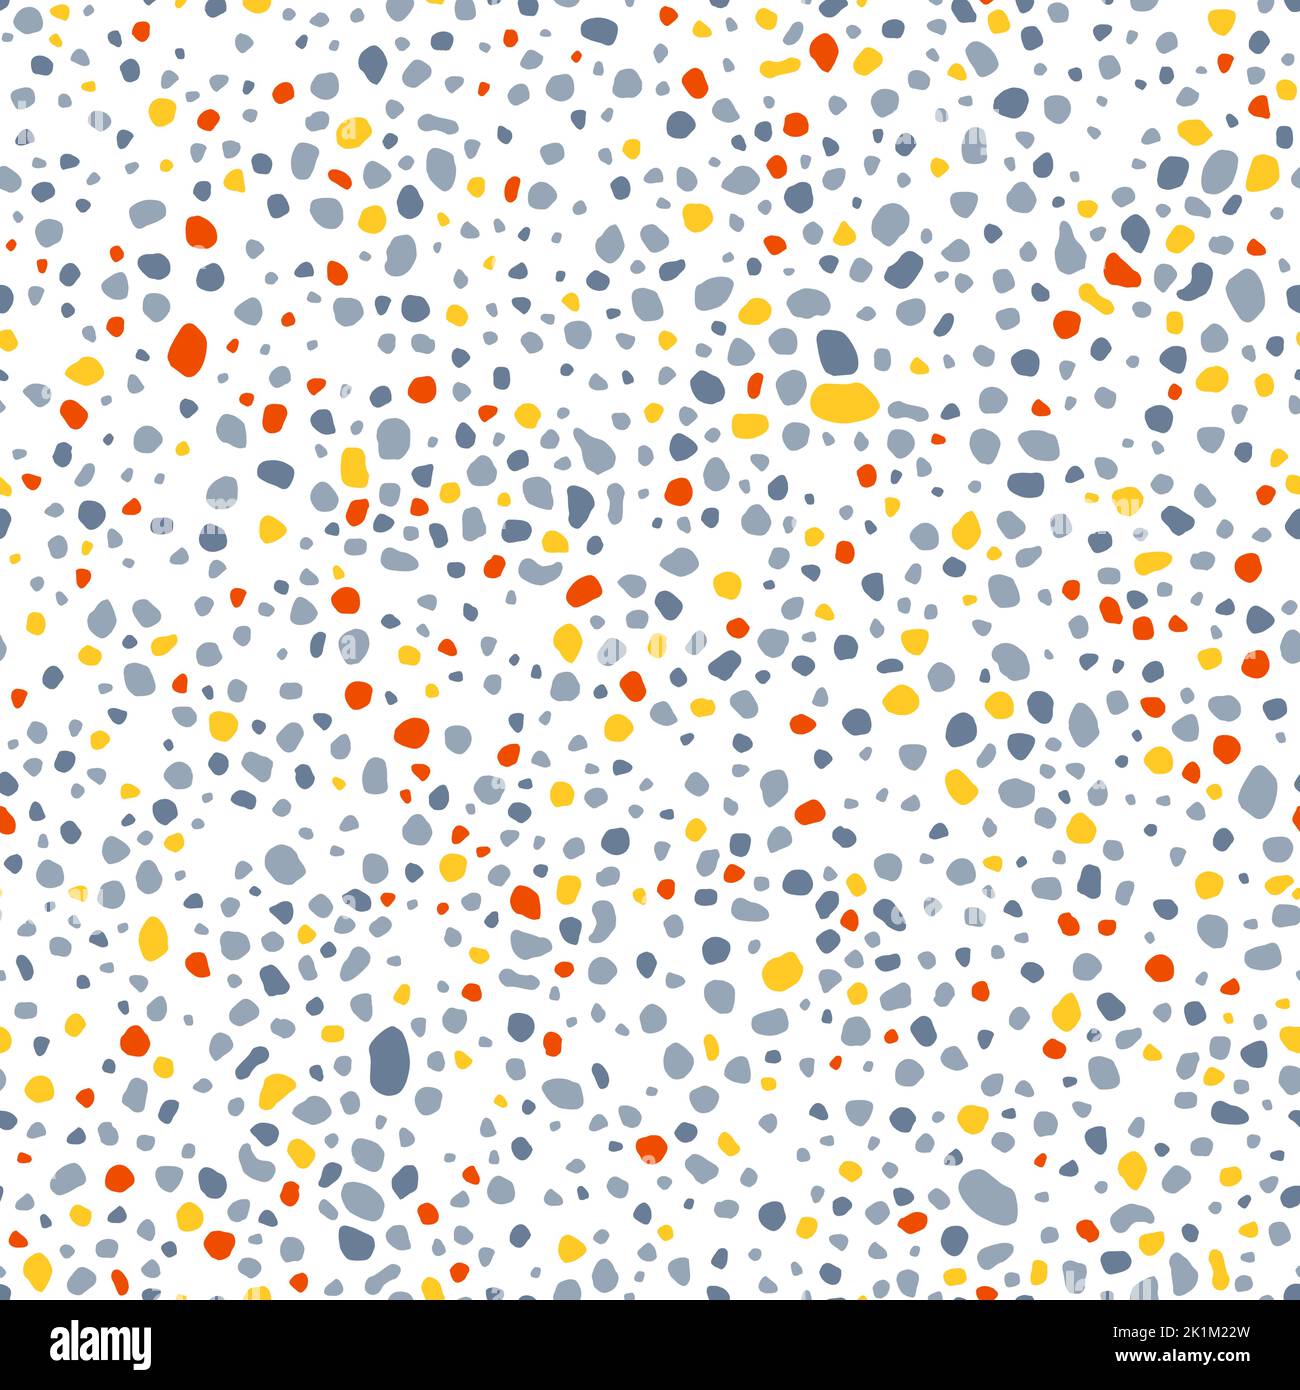 Hand drawn spots background. Irregular spots and dots seamless vector pattern. Fashion texture design. Grey, yellow and red. Stock Vector